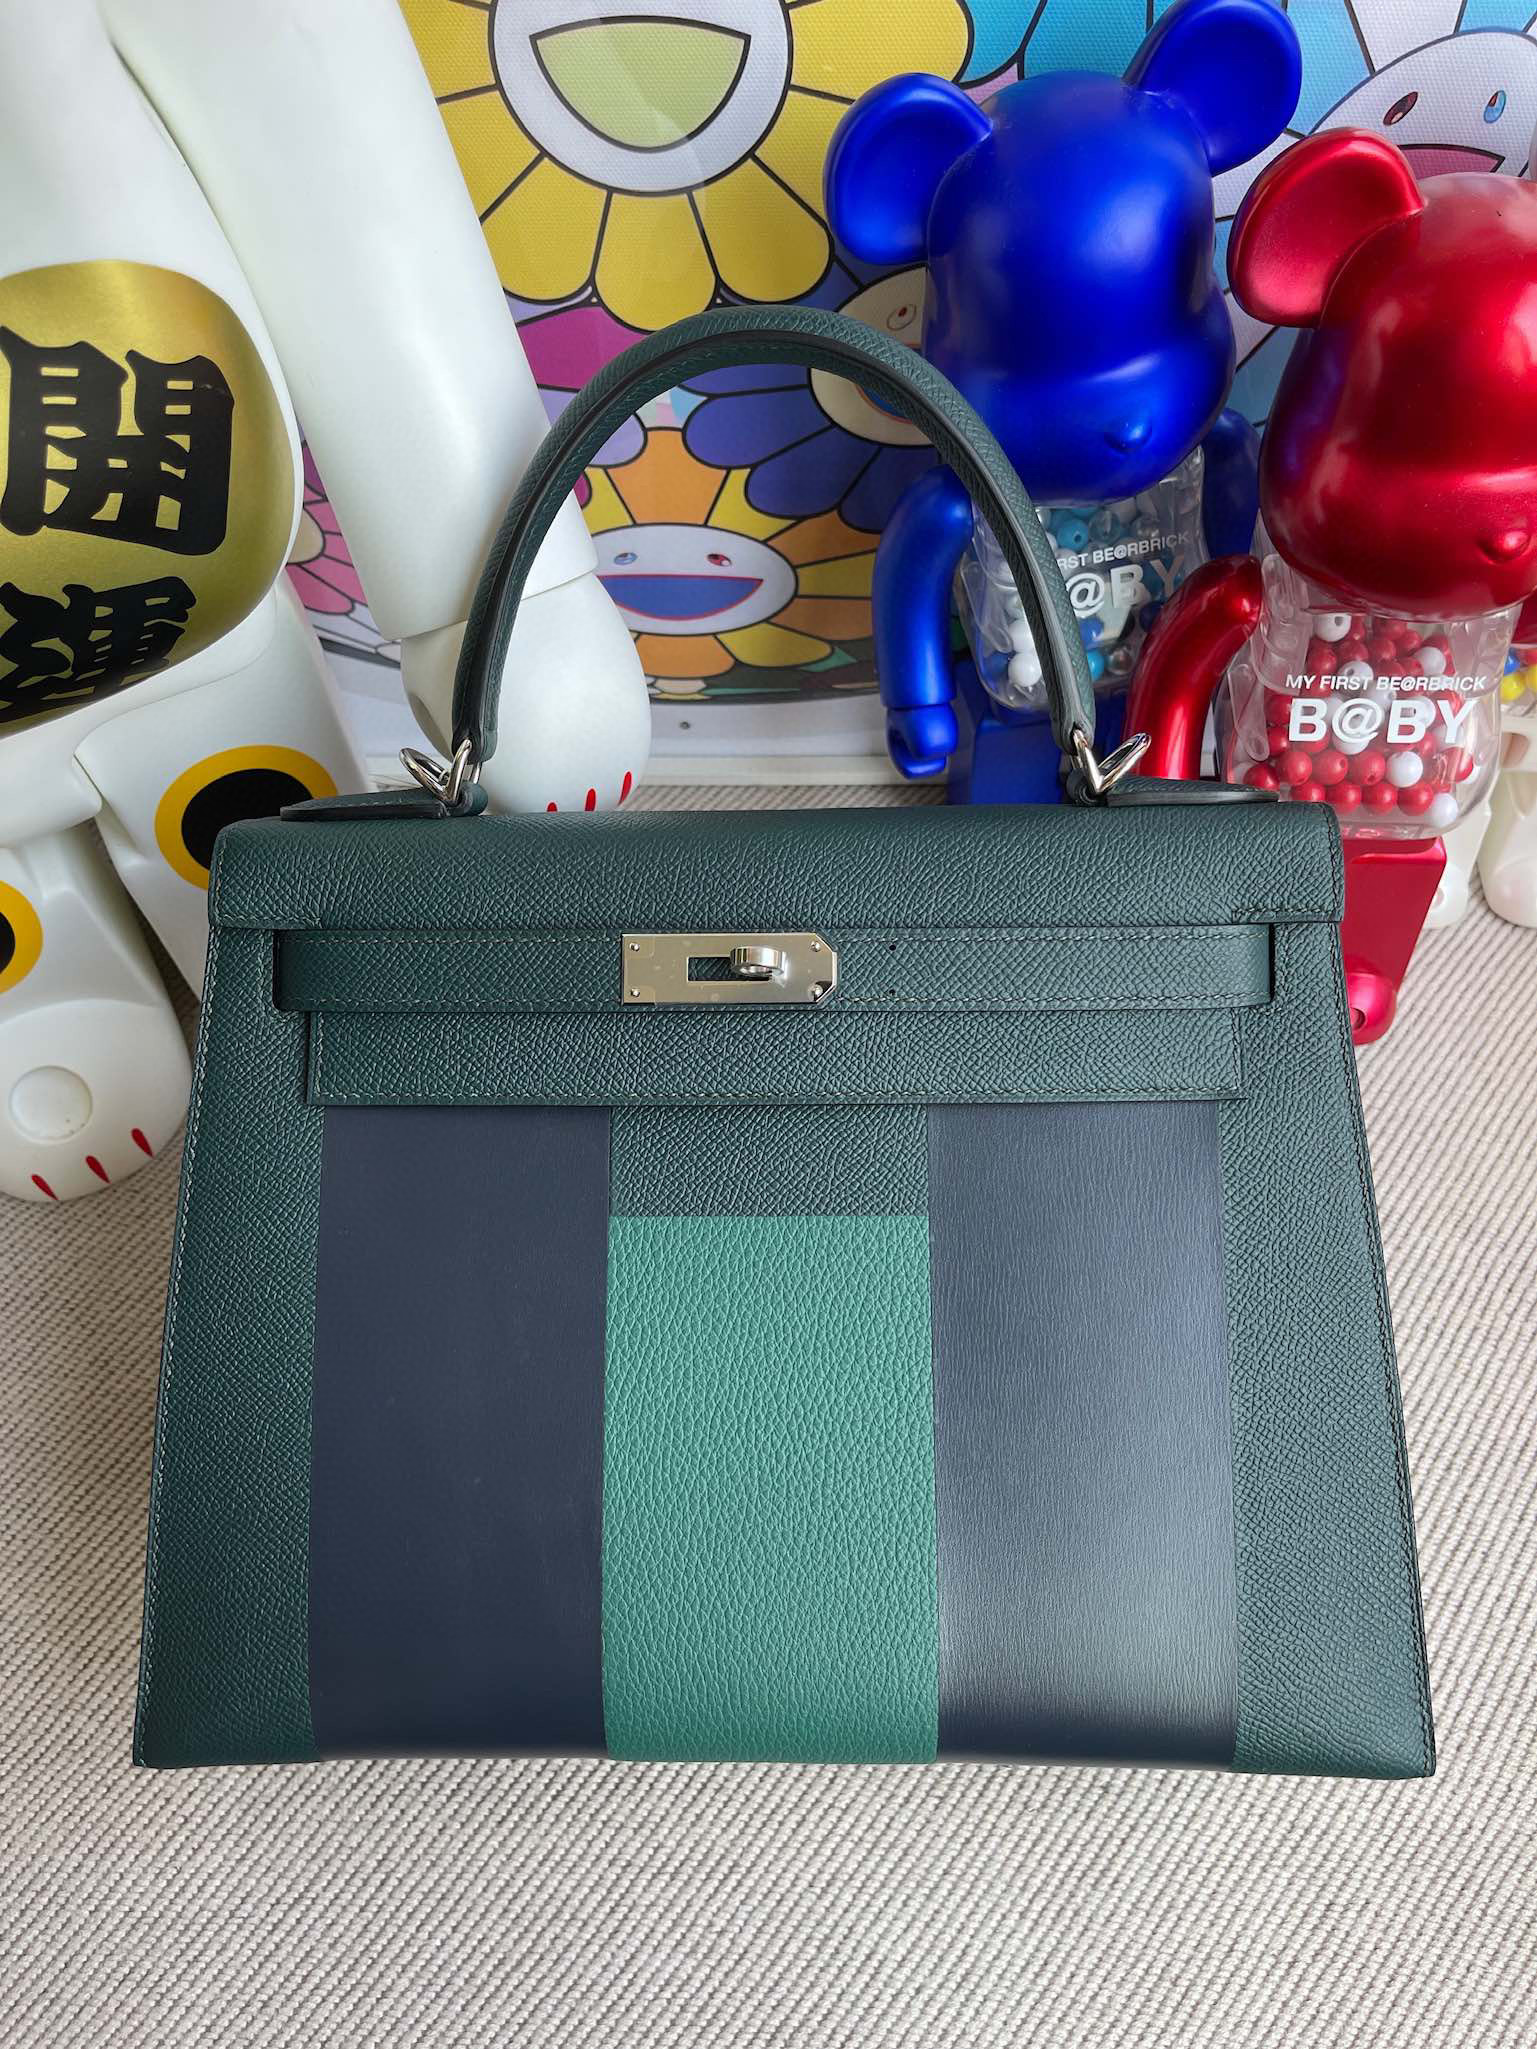 66704 auth HERMES green leather Vert Cypress Togo KELLY 28 TOUCH